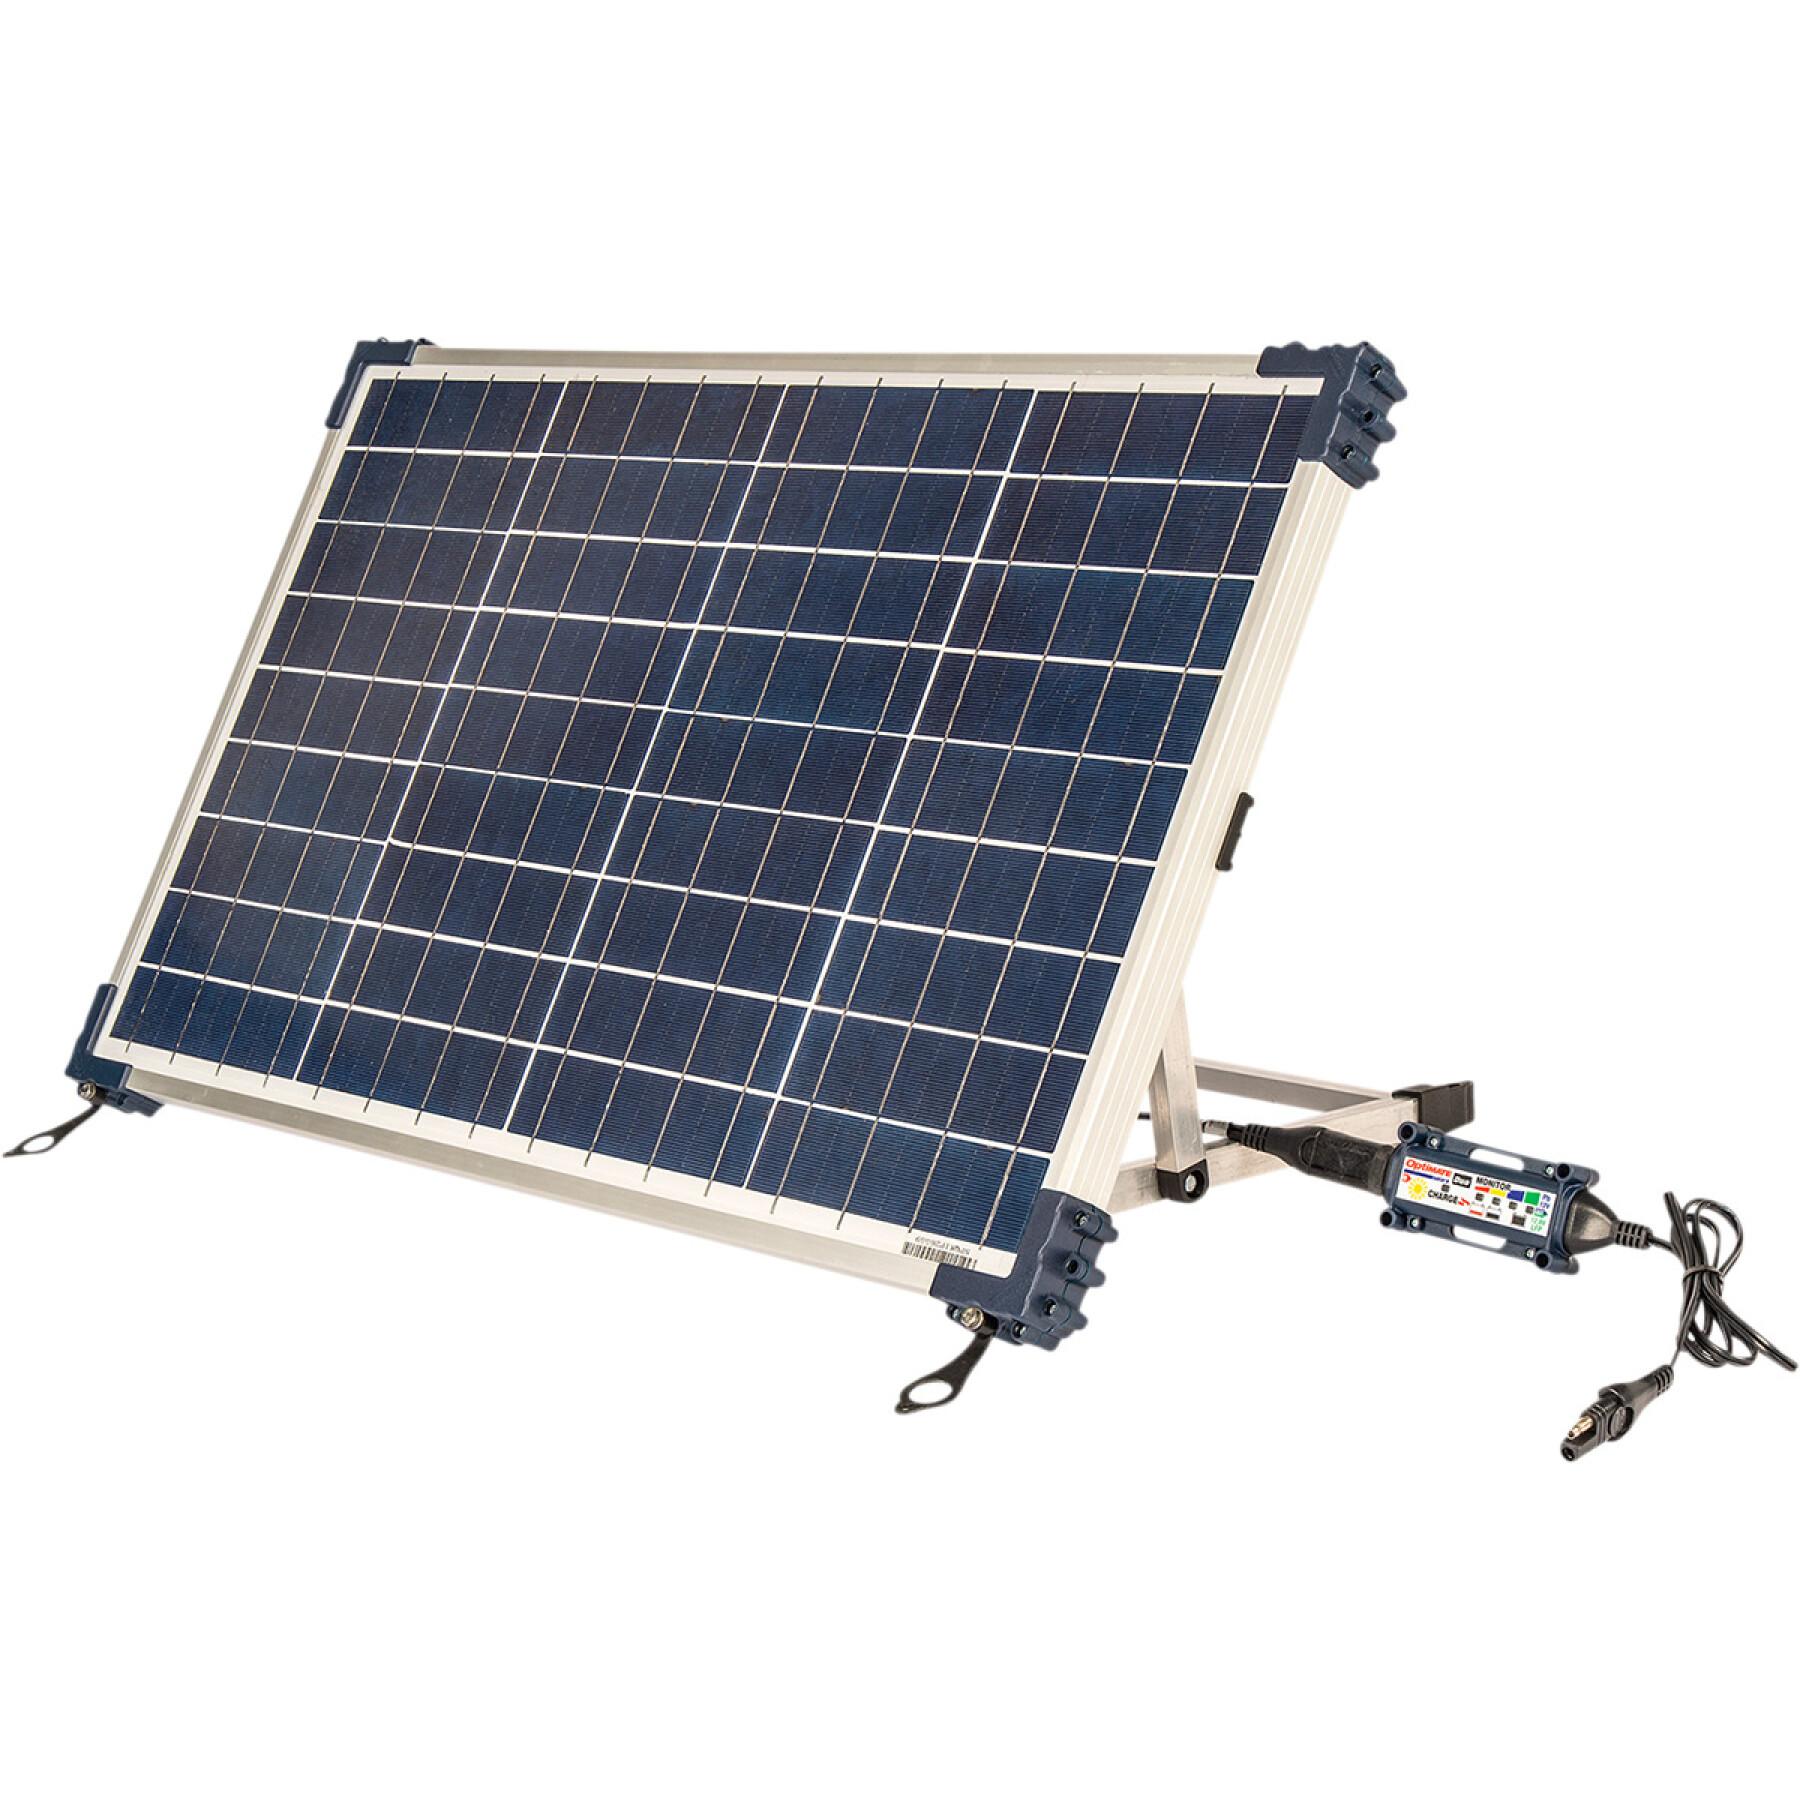 Solar battery charger Tecmate DUO TRVL